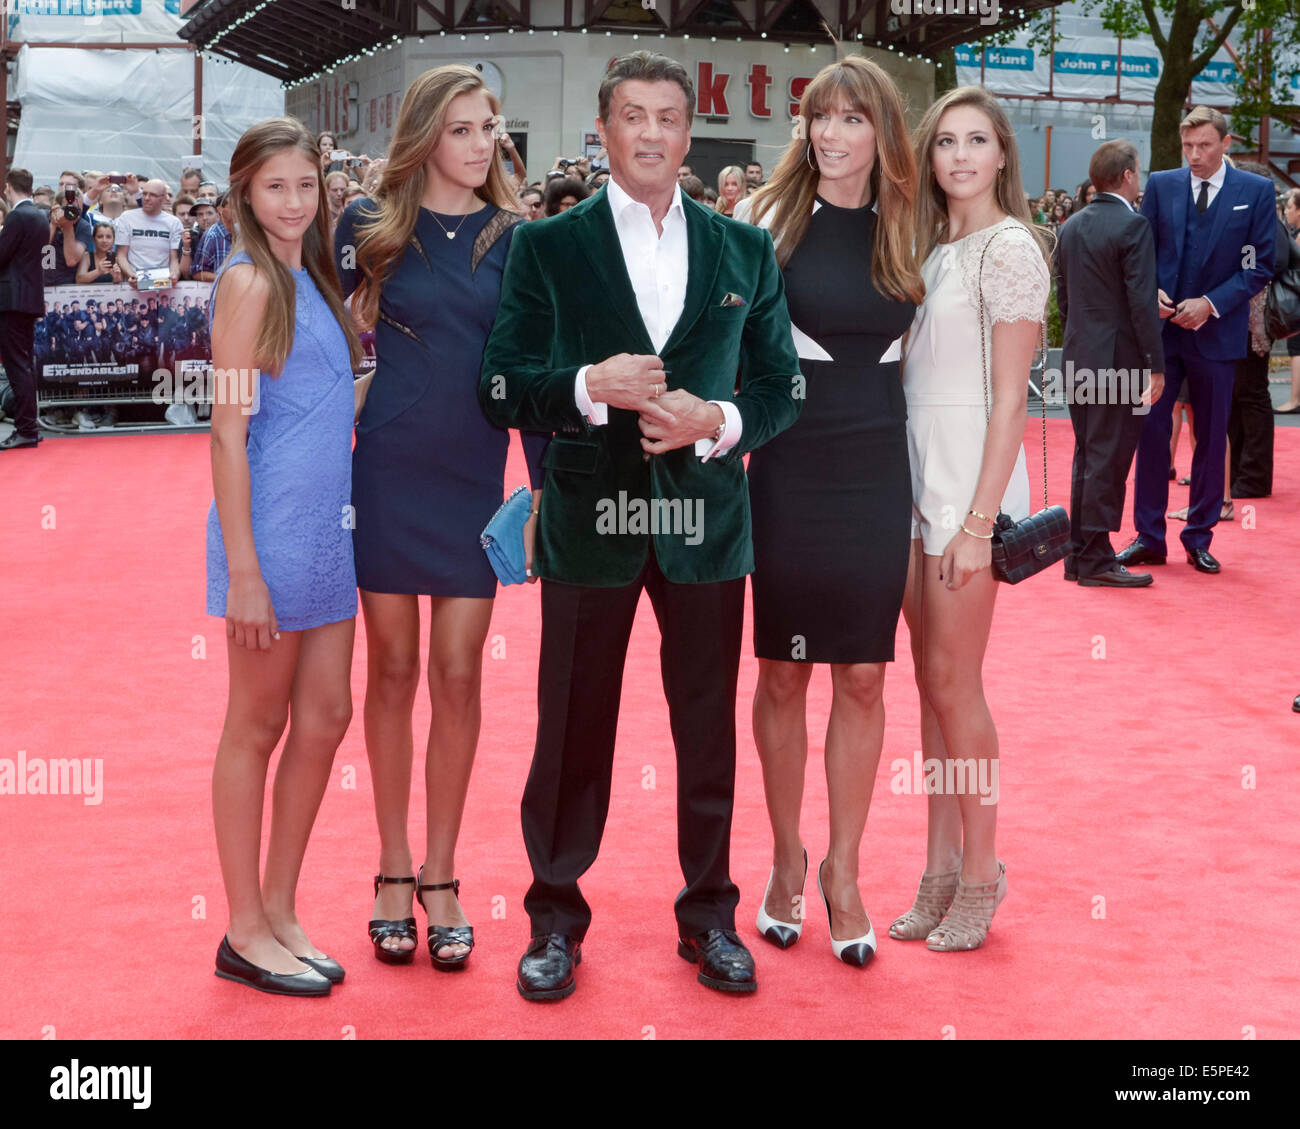 Sylvester Stallone attends the World Premiere of The Expendables 3 on 04/08/2014 at ODEON Leicester Square, London. Persons pictured: Sylvester Stallone, Jennifer Flavin. Picture by Julie Edwards Stock Photo